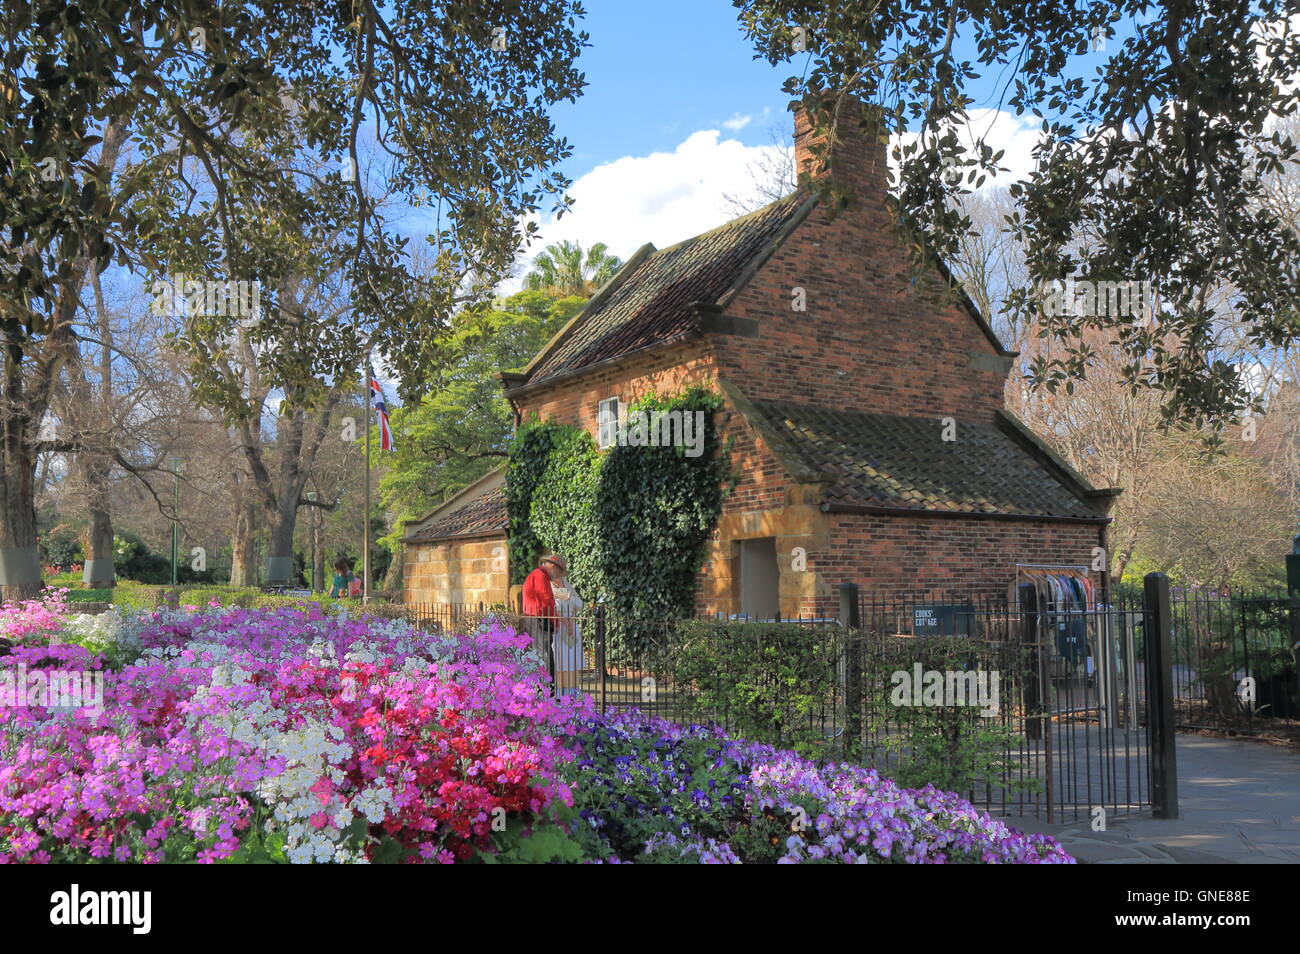 Fitzroy Garden and Historical building Cook’s cottage in Melbourne Australia Stock Photo